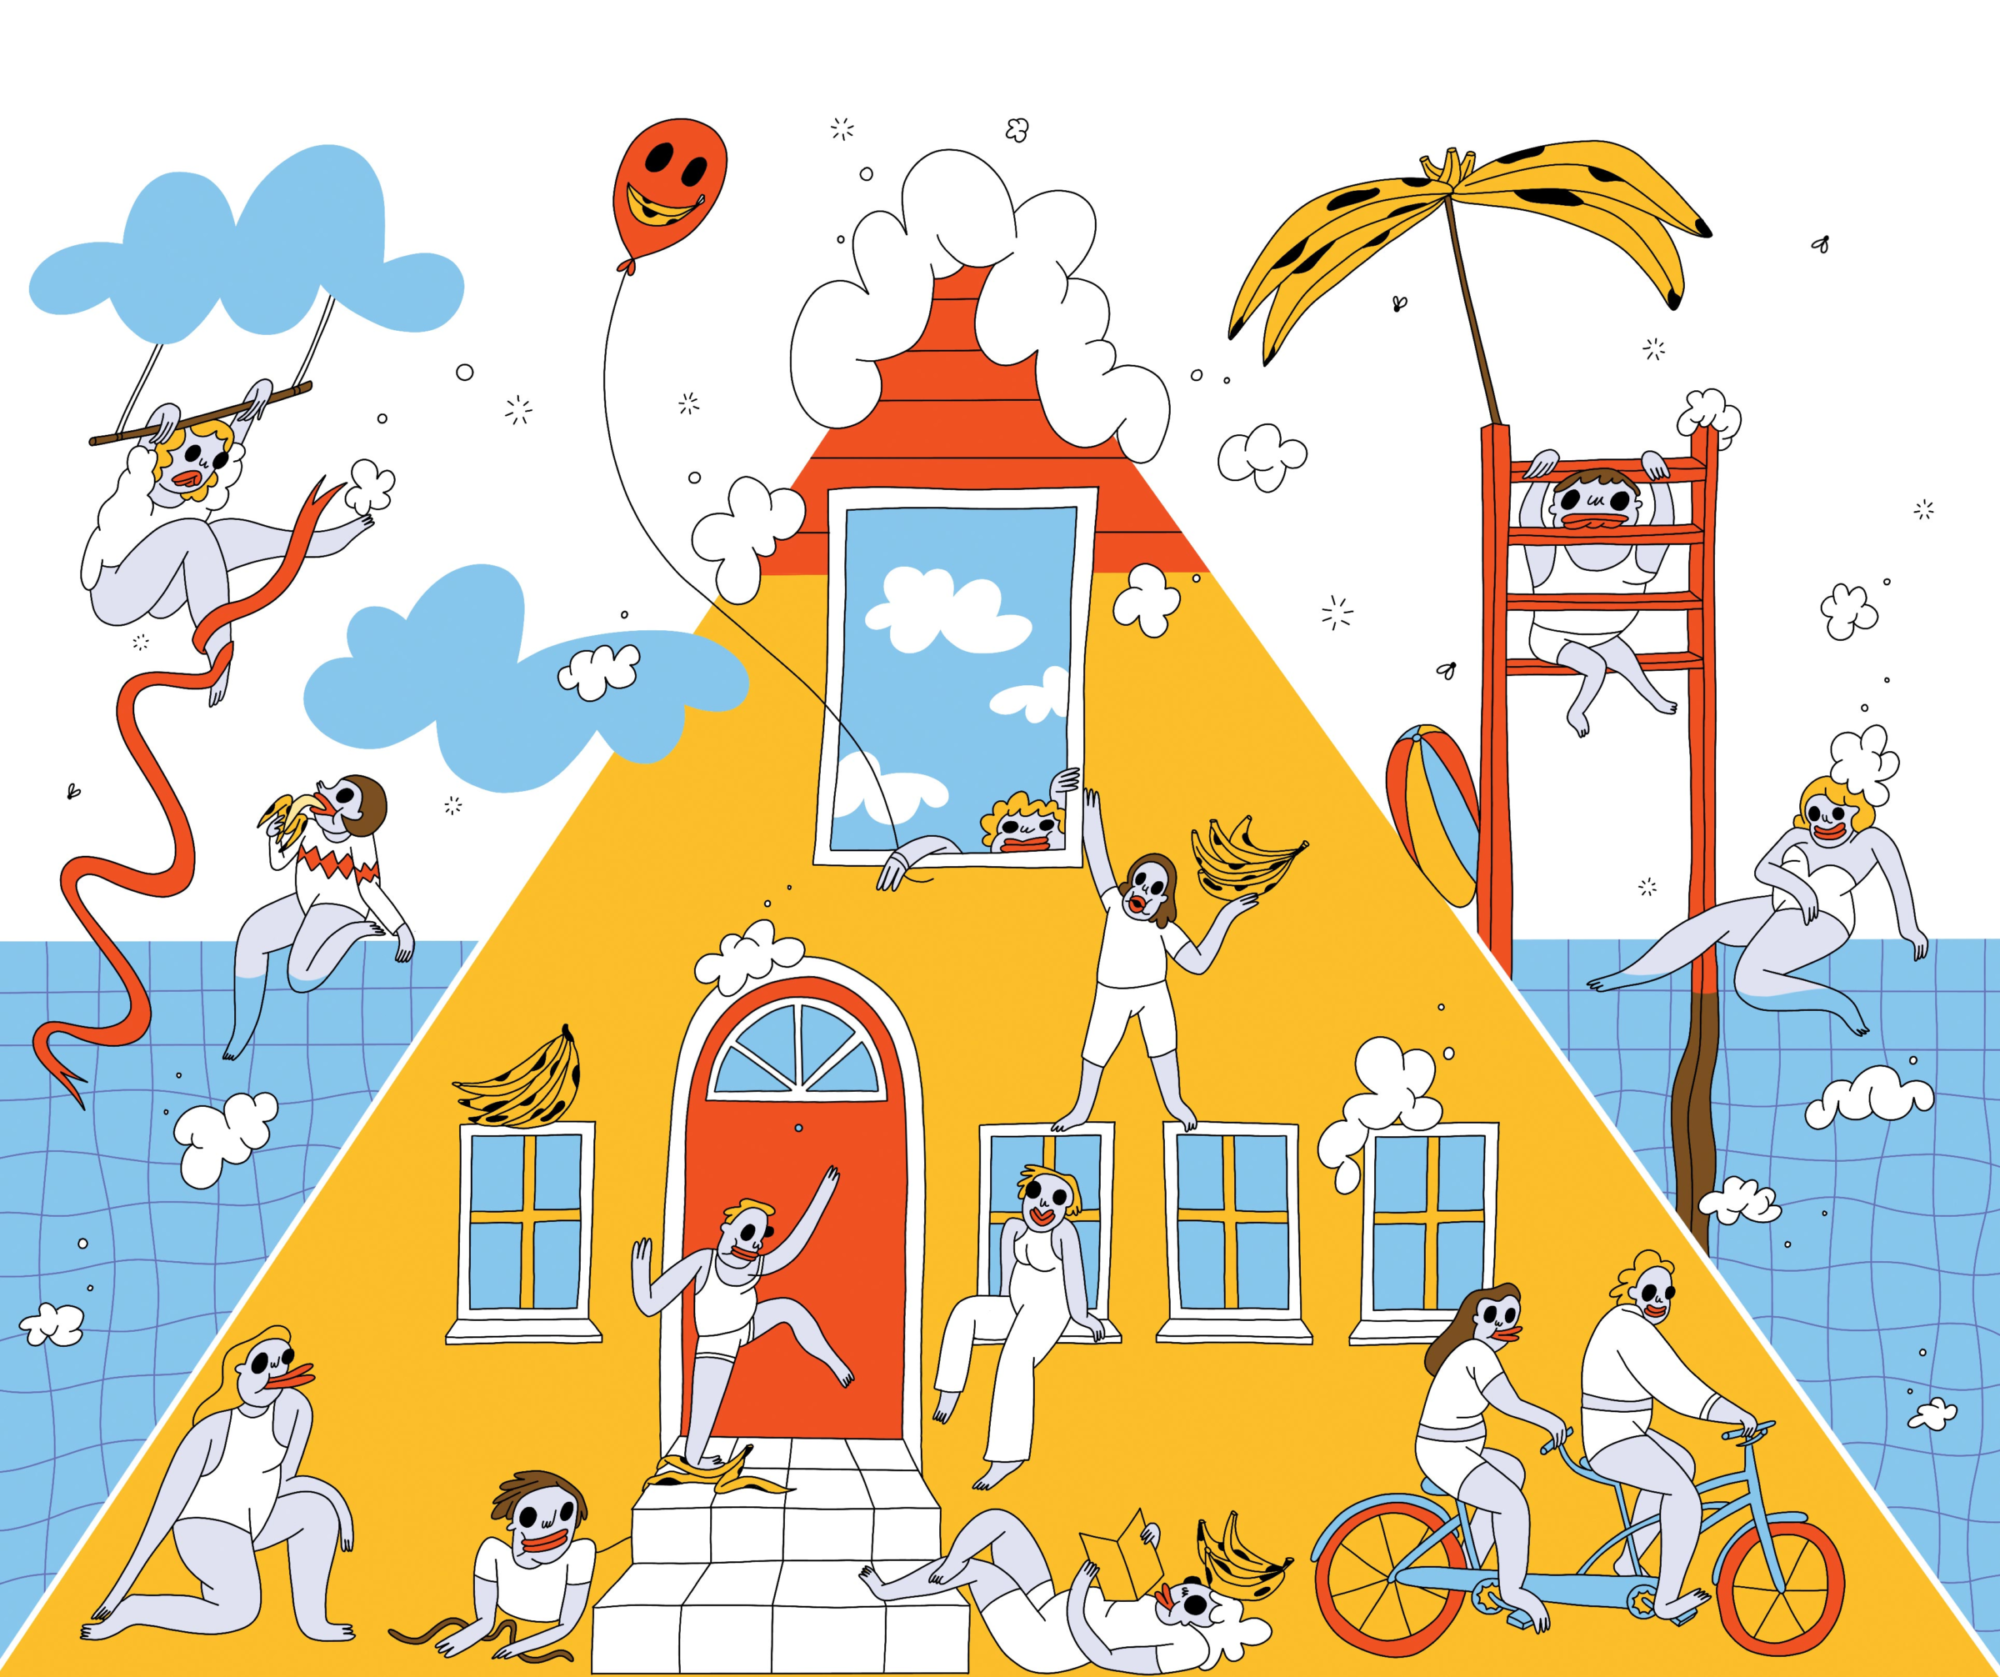 Stylized illustration of individuals in front of a triangle house